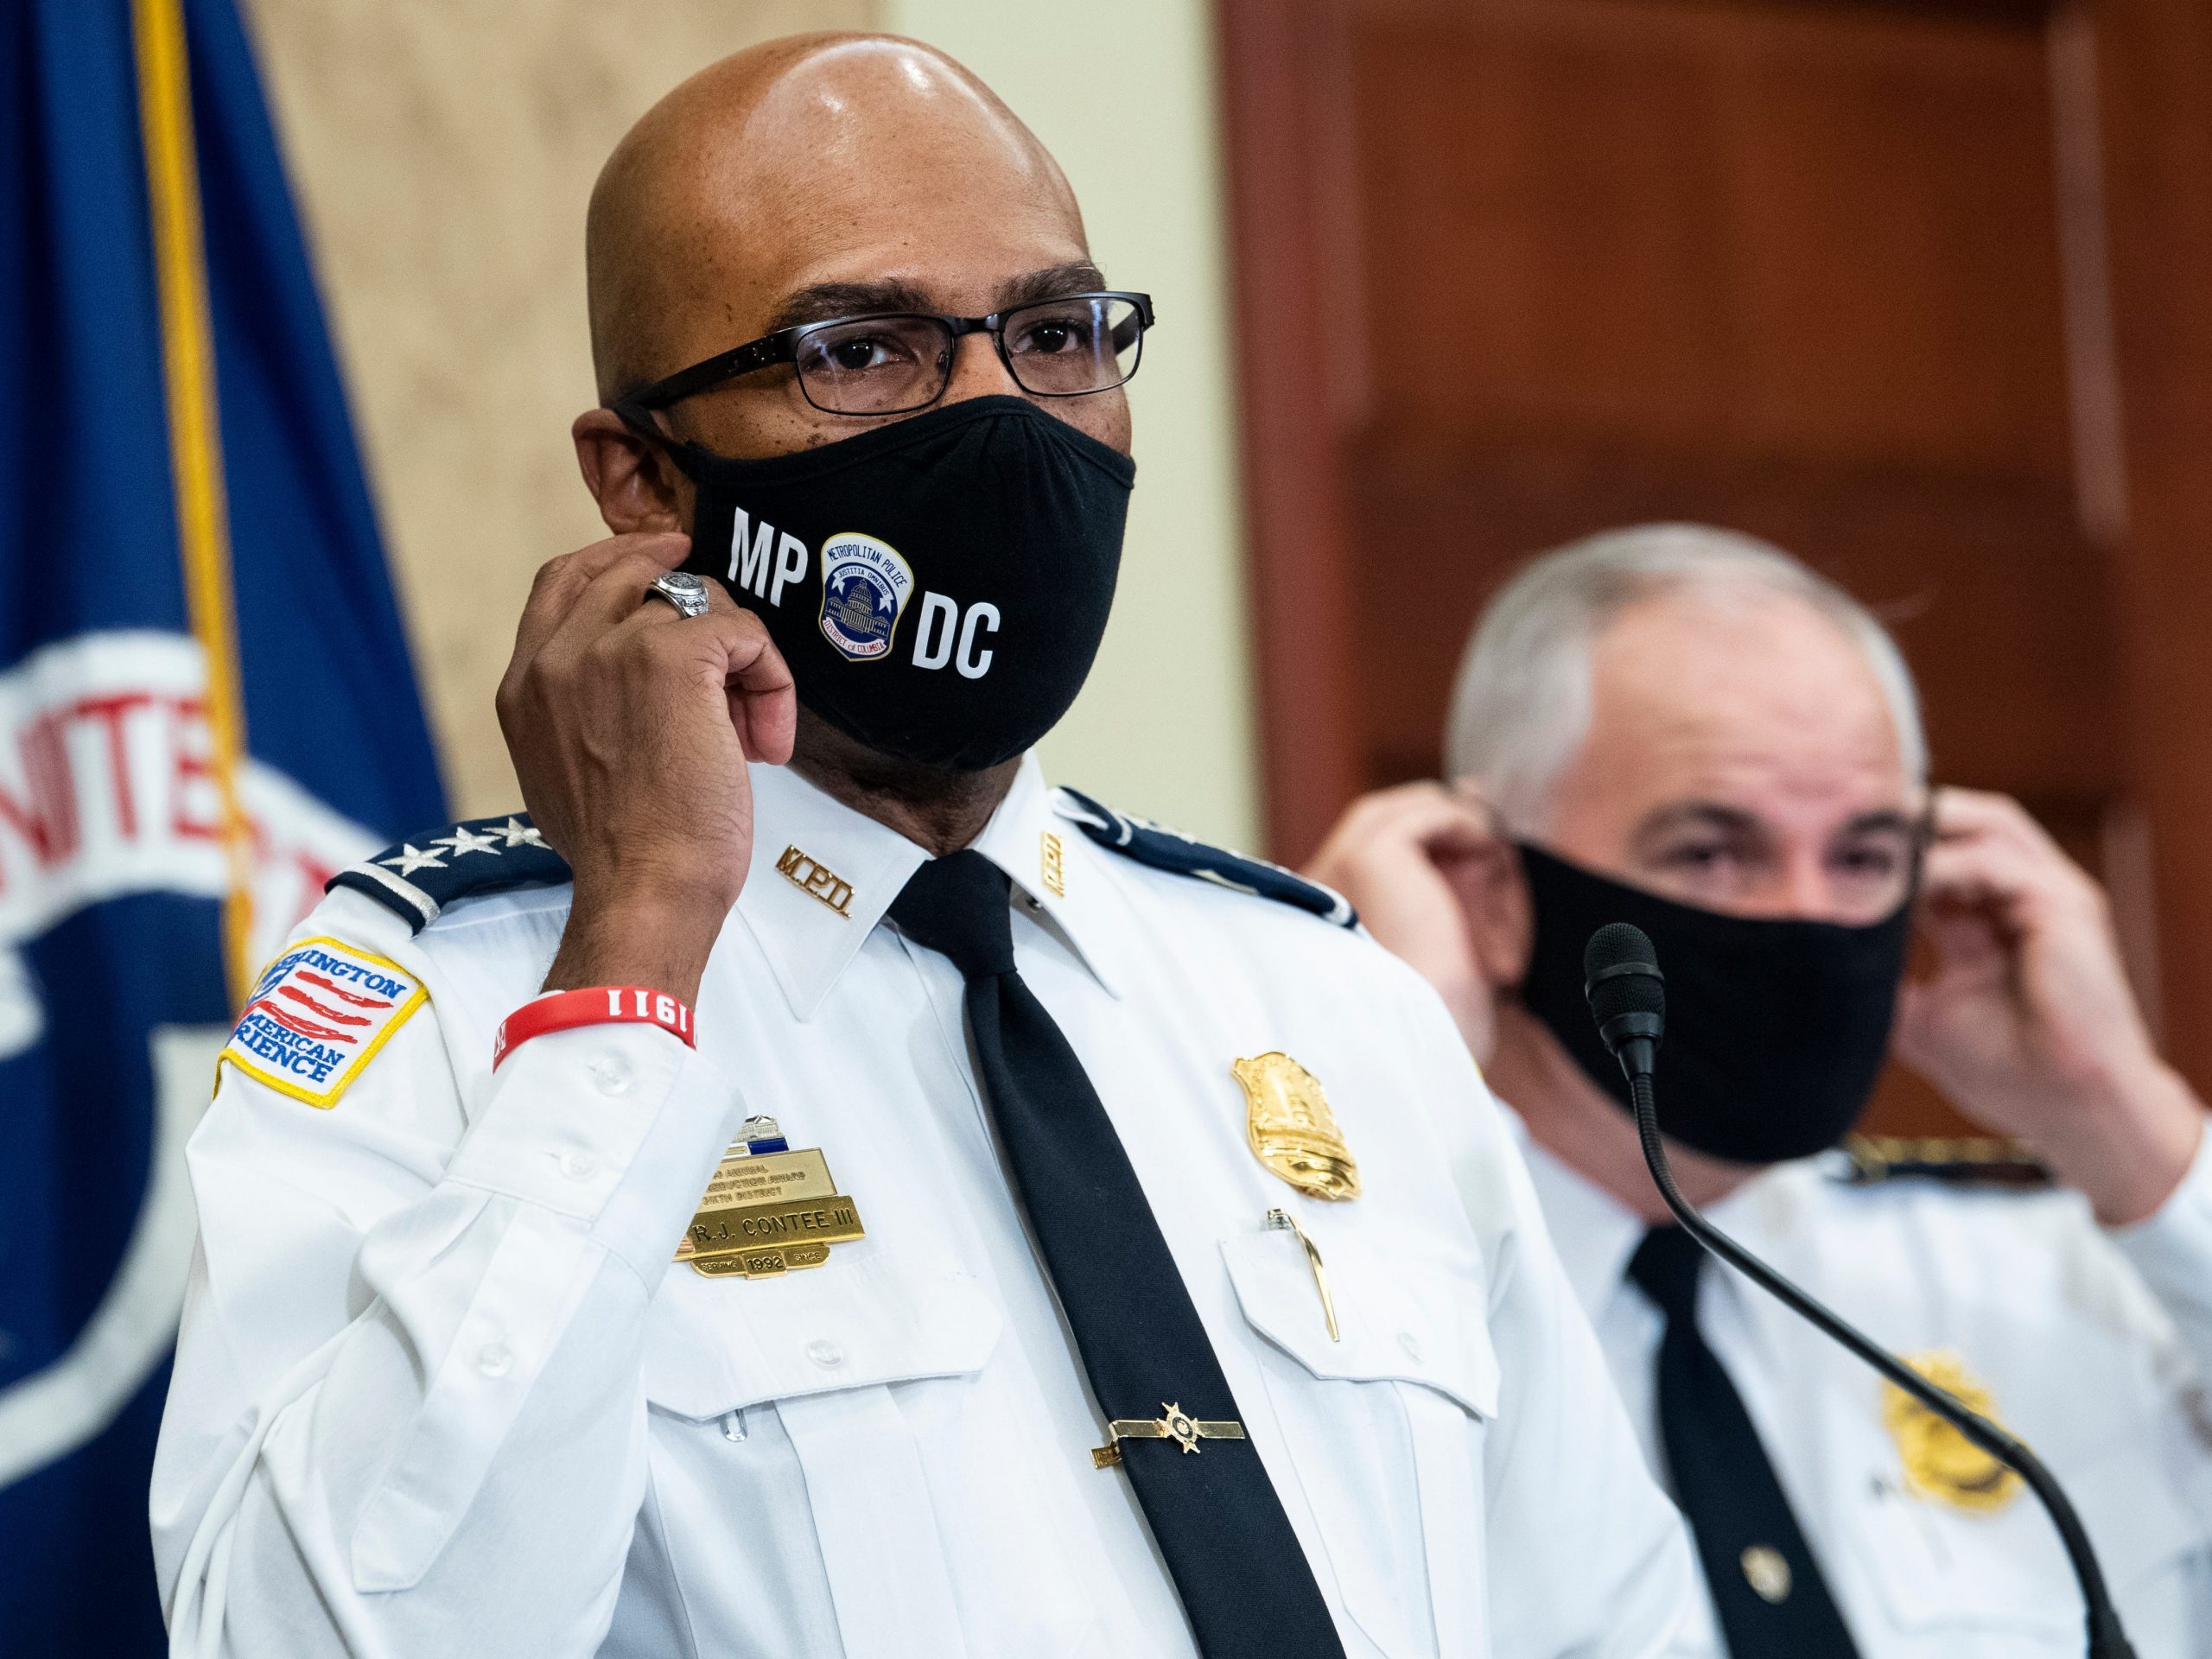 Metropolitan Police Department Chief Robert Contee and U.S. Capitol Police Chief Thomas Manger, conduct a news conference in the Capitol Visitor Center on Friday, September 17, 2021.